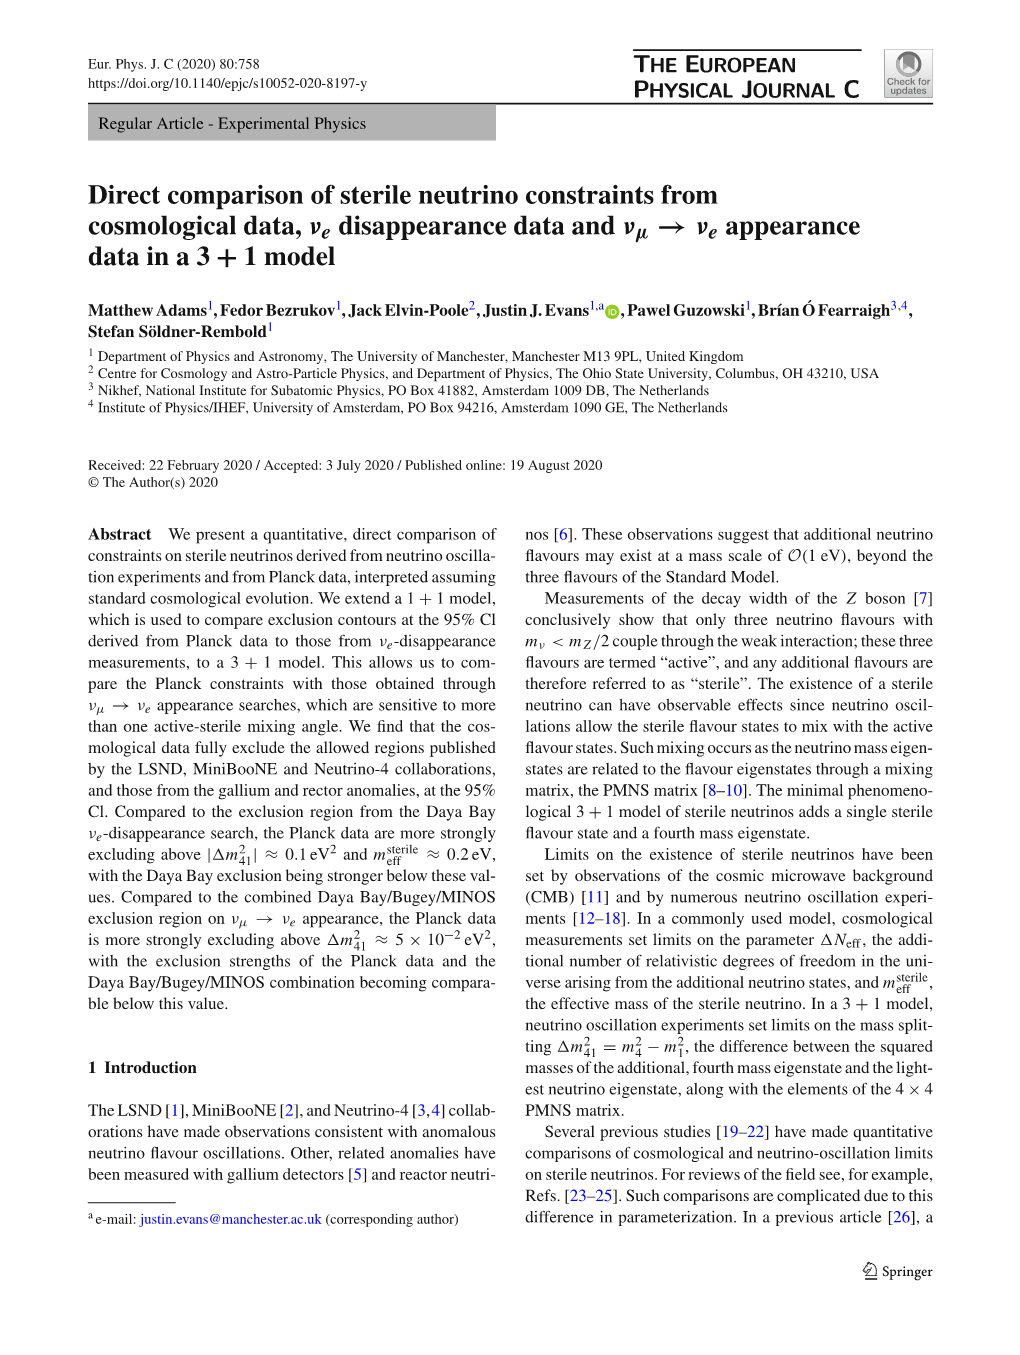 Direct Comparison of Sterile Neutrino Constraints from Cosmological Data, Νe Disappearance Data and Νμ → Νe Appearance Data in a 3 + 1Model